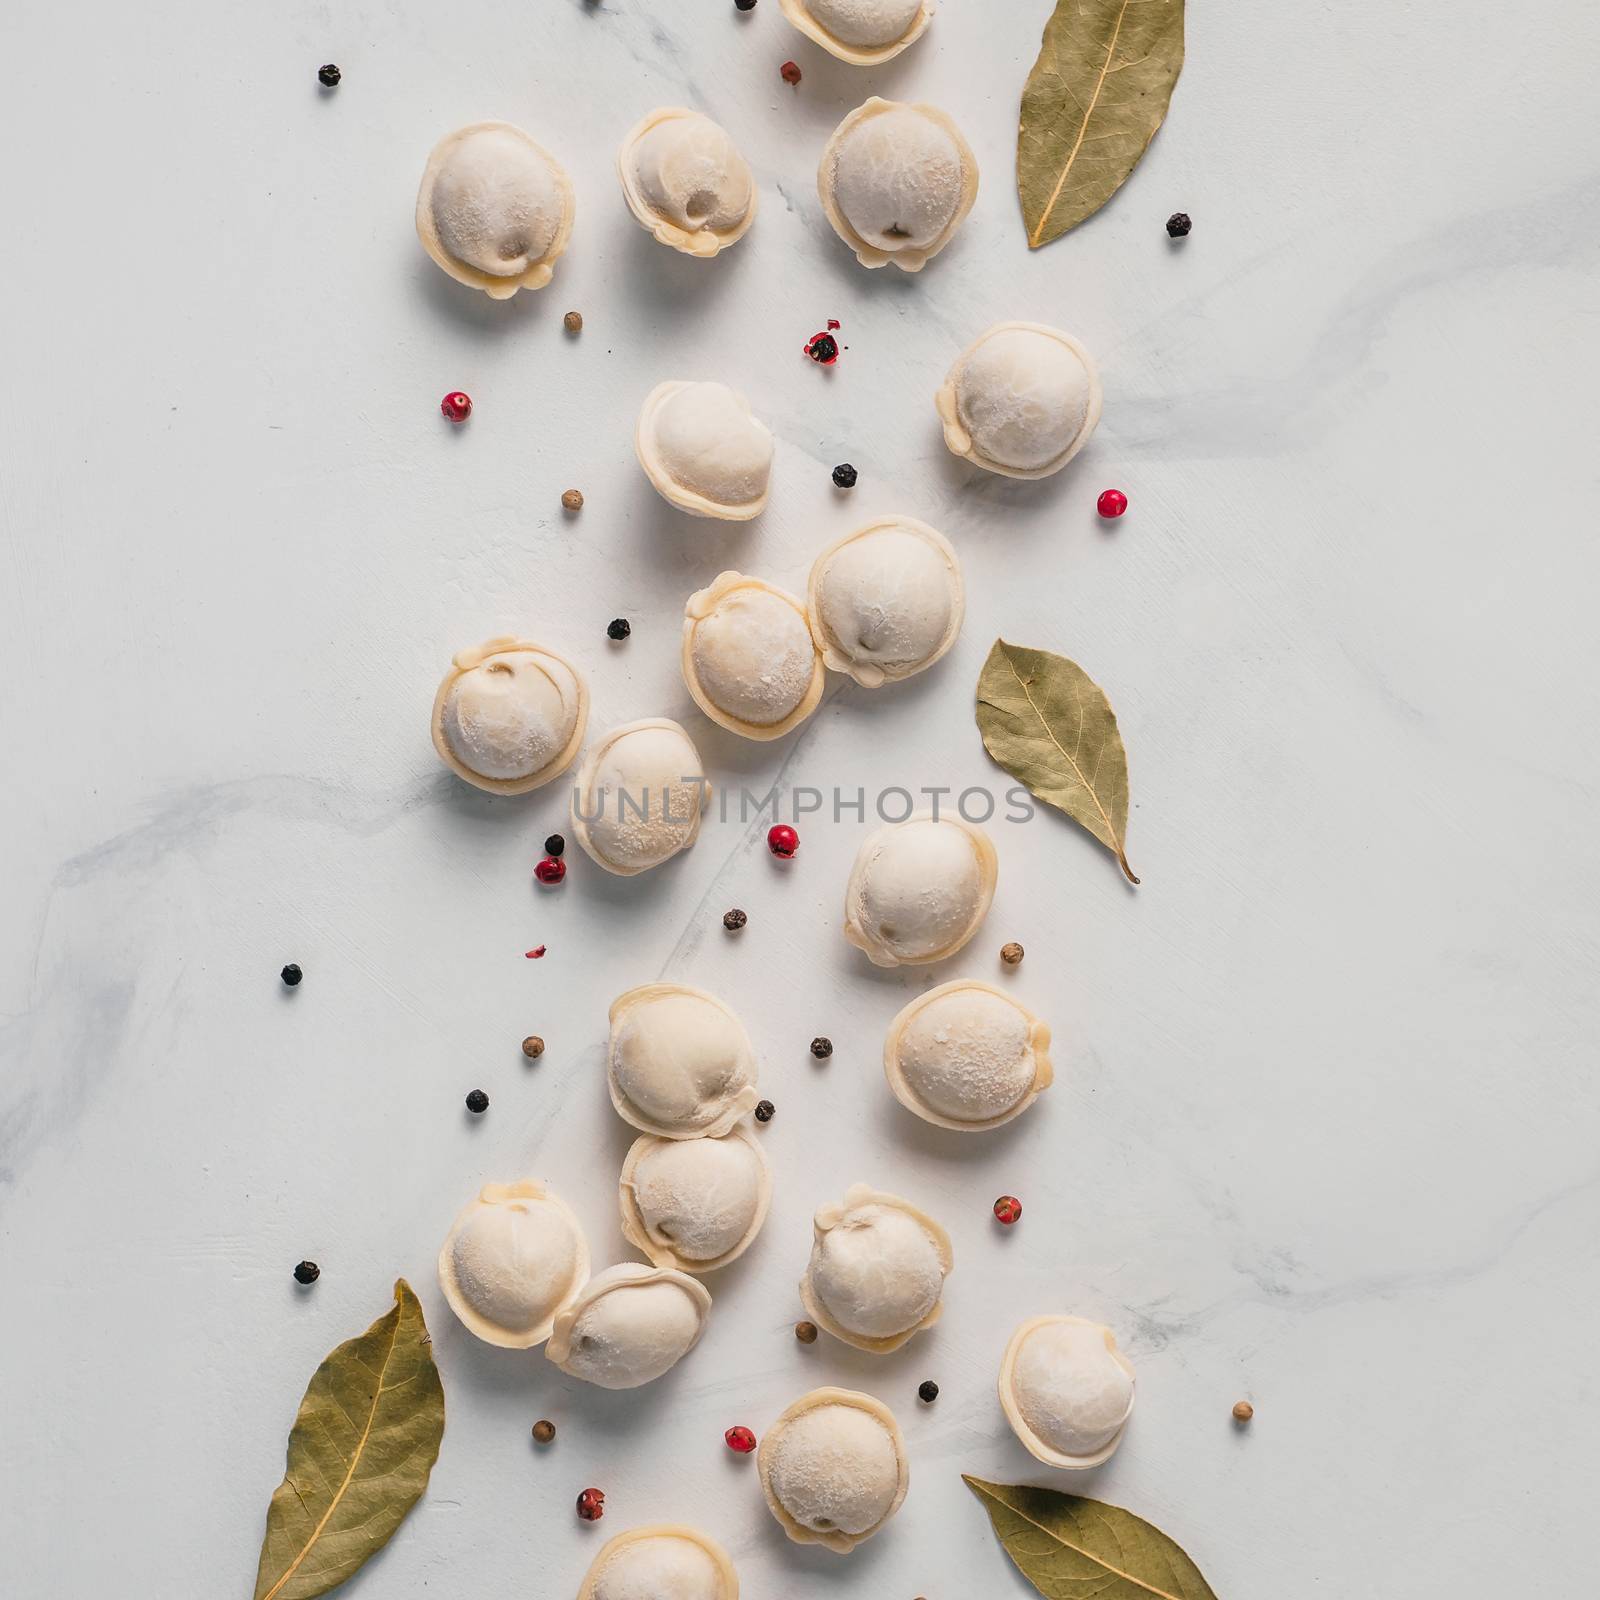 Pattern of frozen uncooked russian pelmeni with peppercorns and bay leaves on white marble table. Creative layout of dumplings. Beautiful scattered raw dumplings